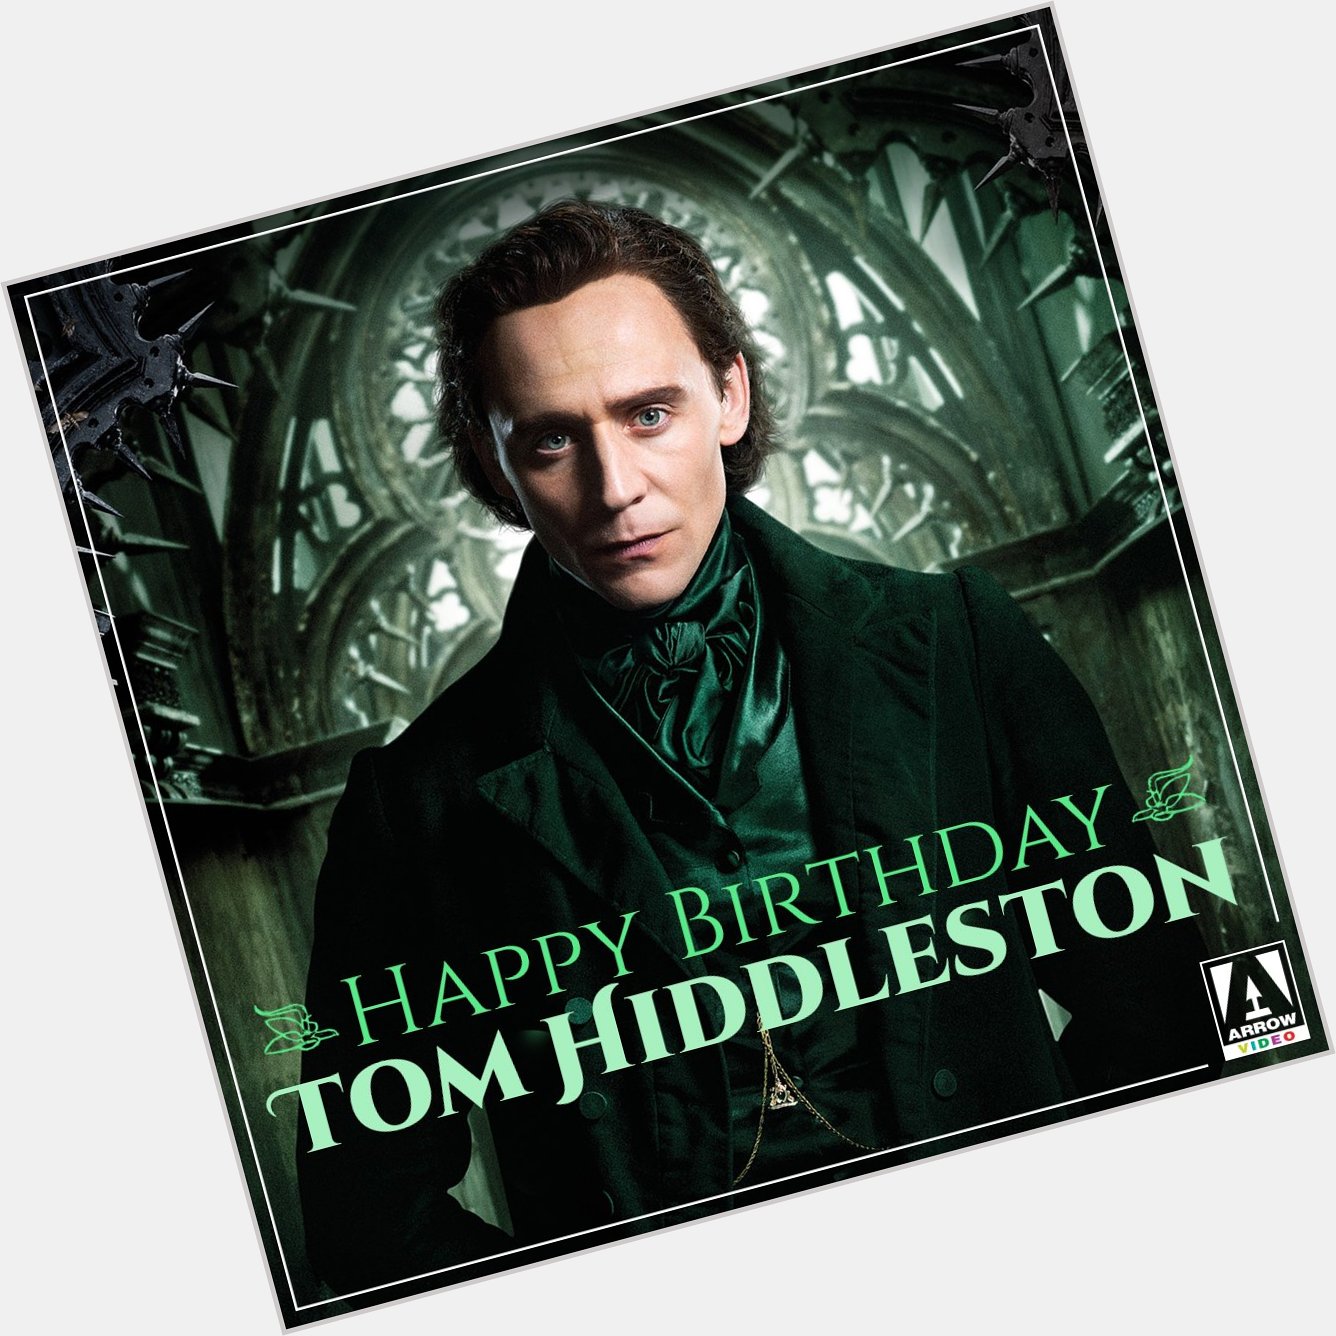 Good guy or bad guy. He knows how to play it smooth! Happy birthday to Tom Hiddleston. 